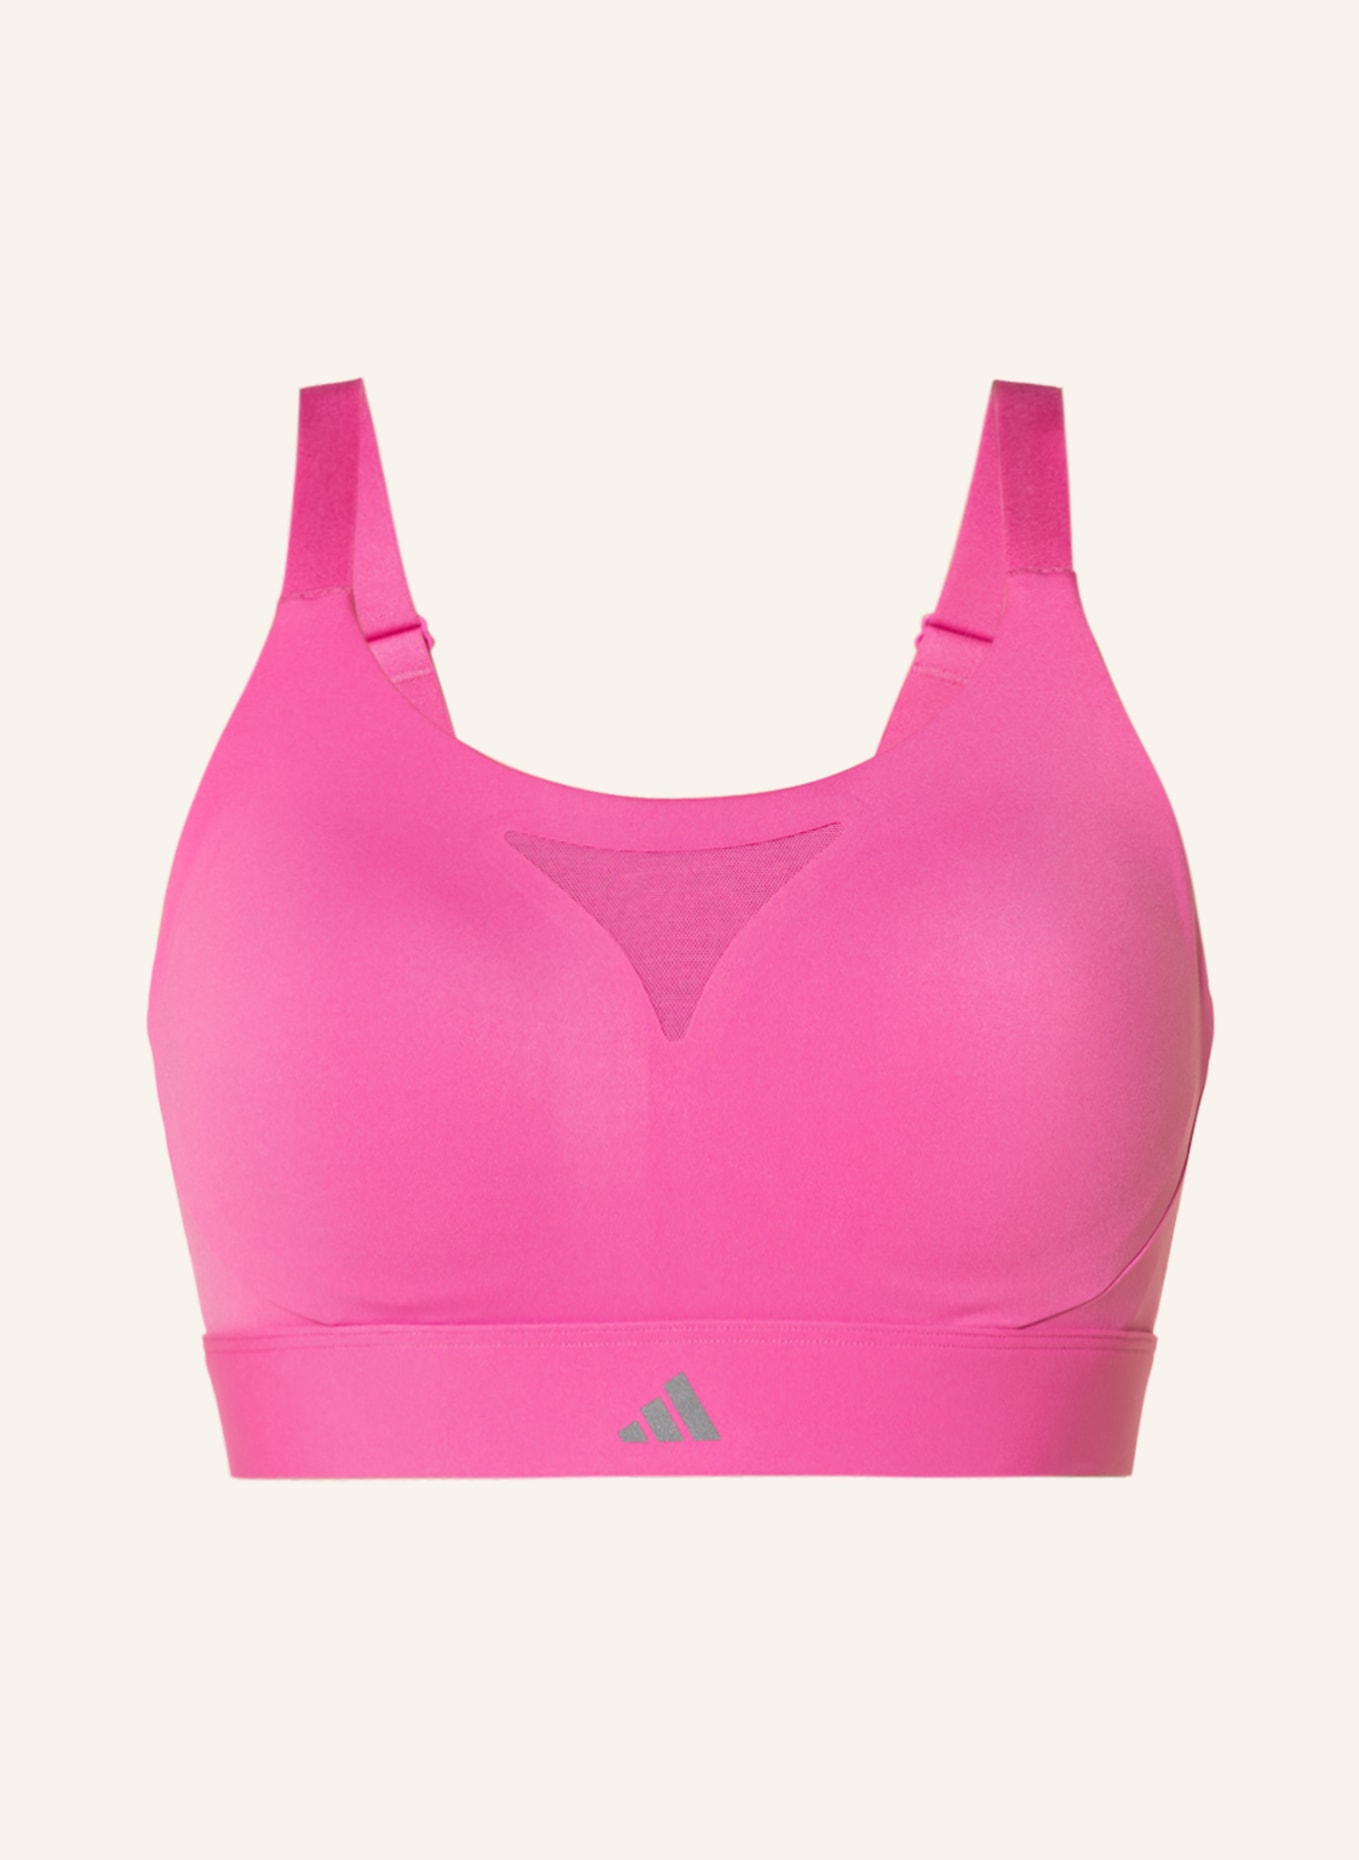 adidas Sports bra TLRD IMPACT TRAINING with mesh in pink